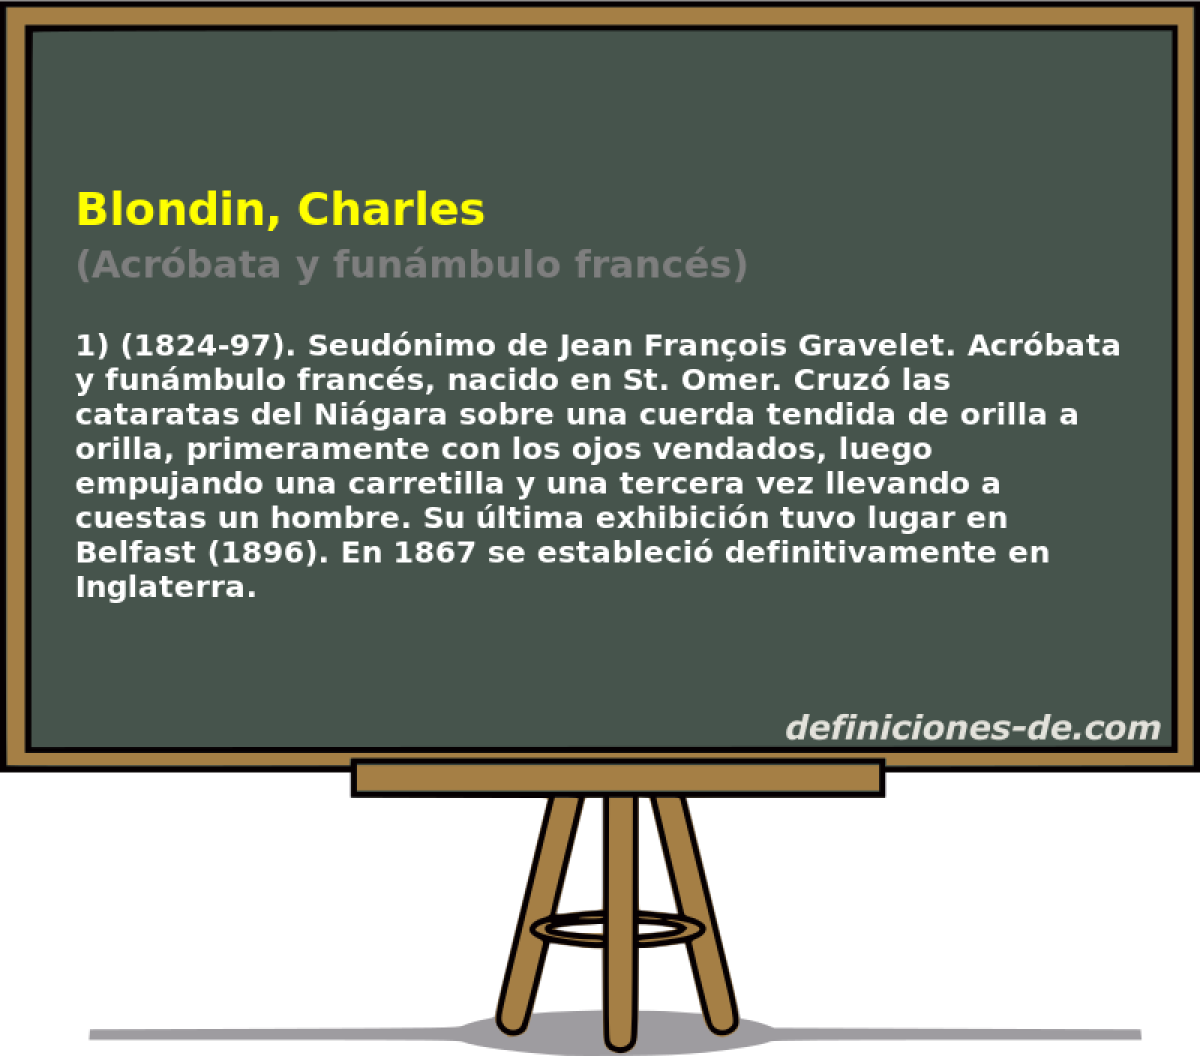 Blondin, Charles (Acrbata y funmbulo francs)